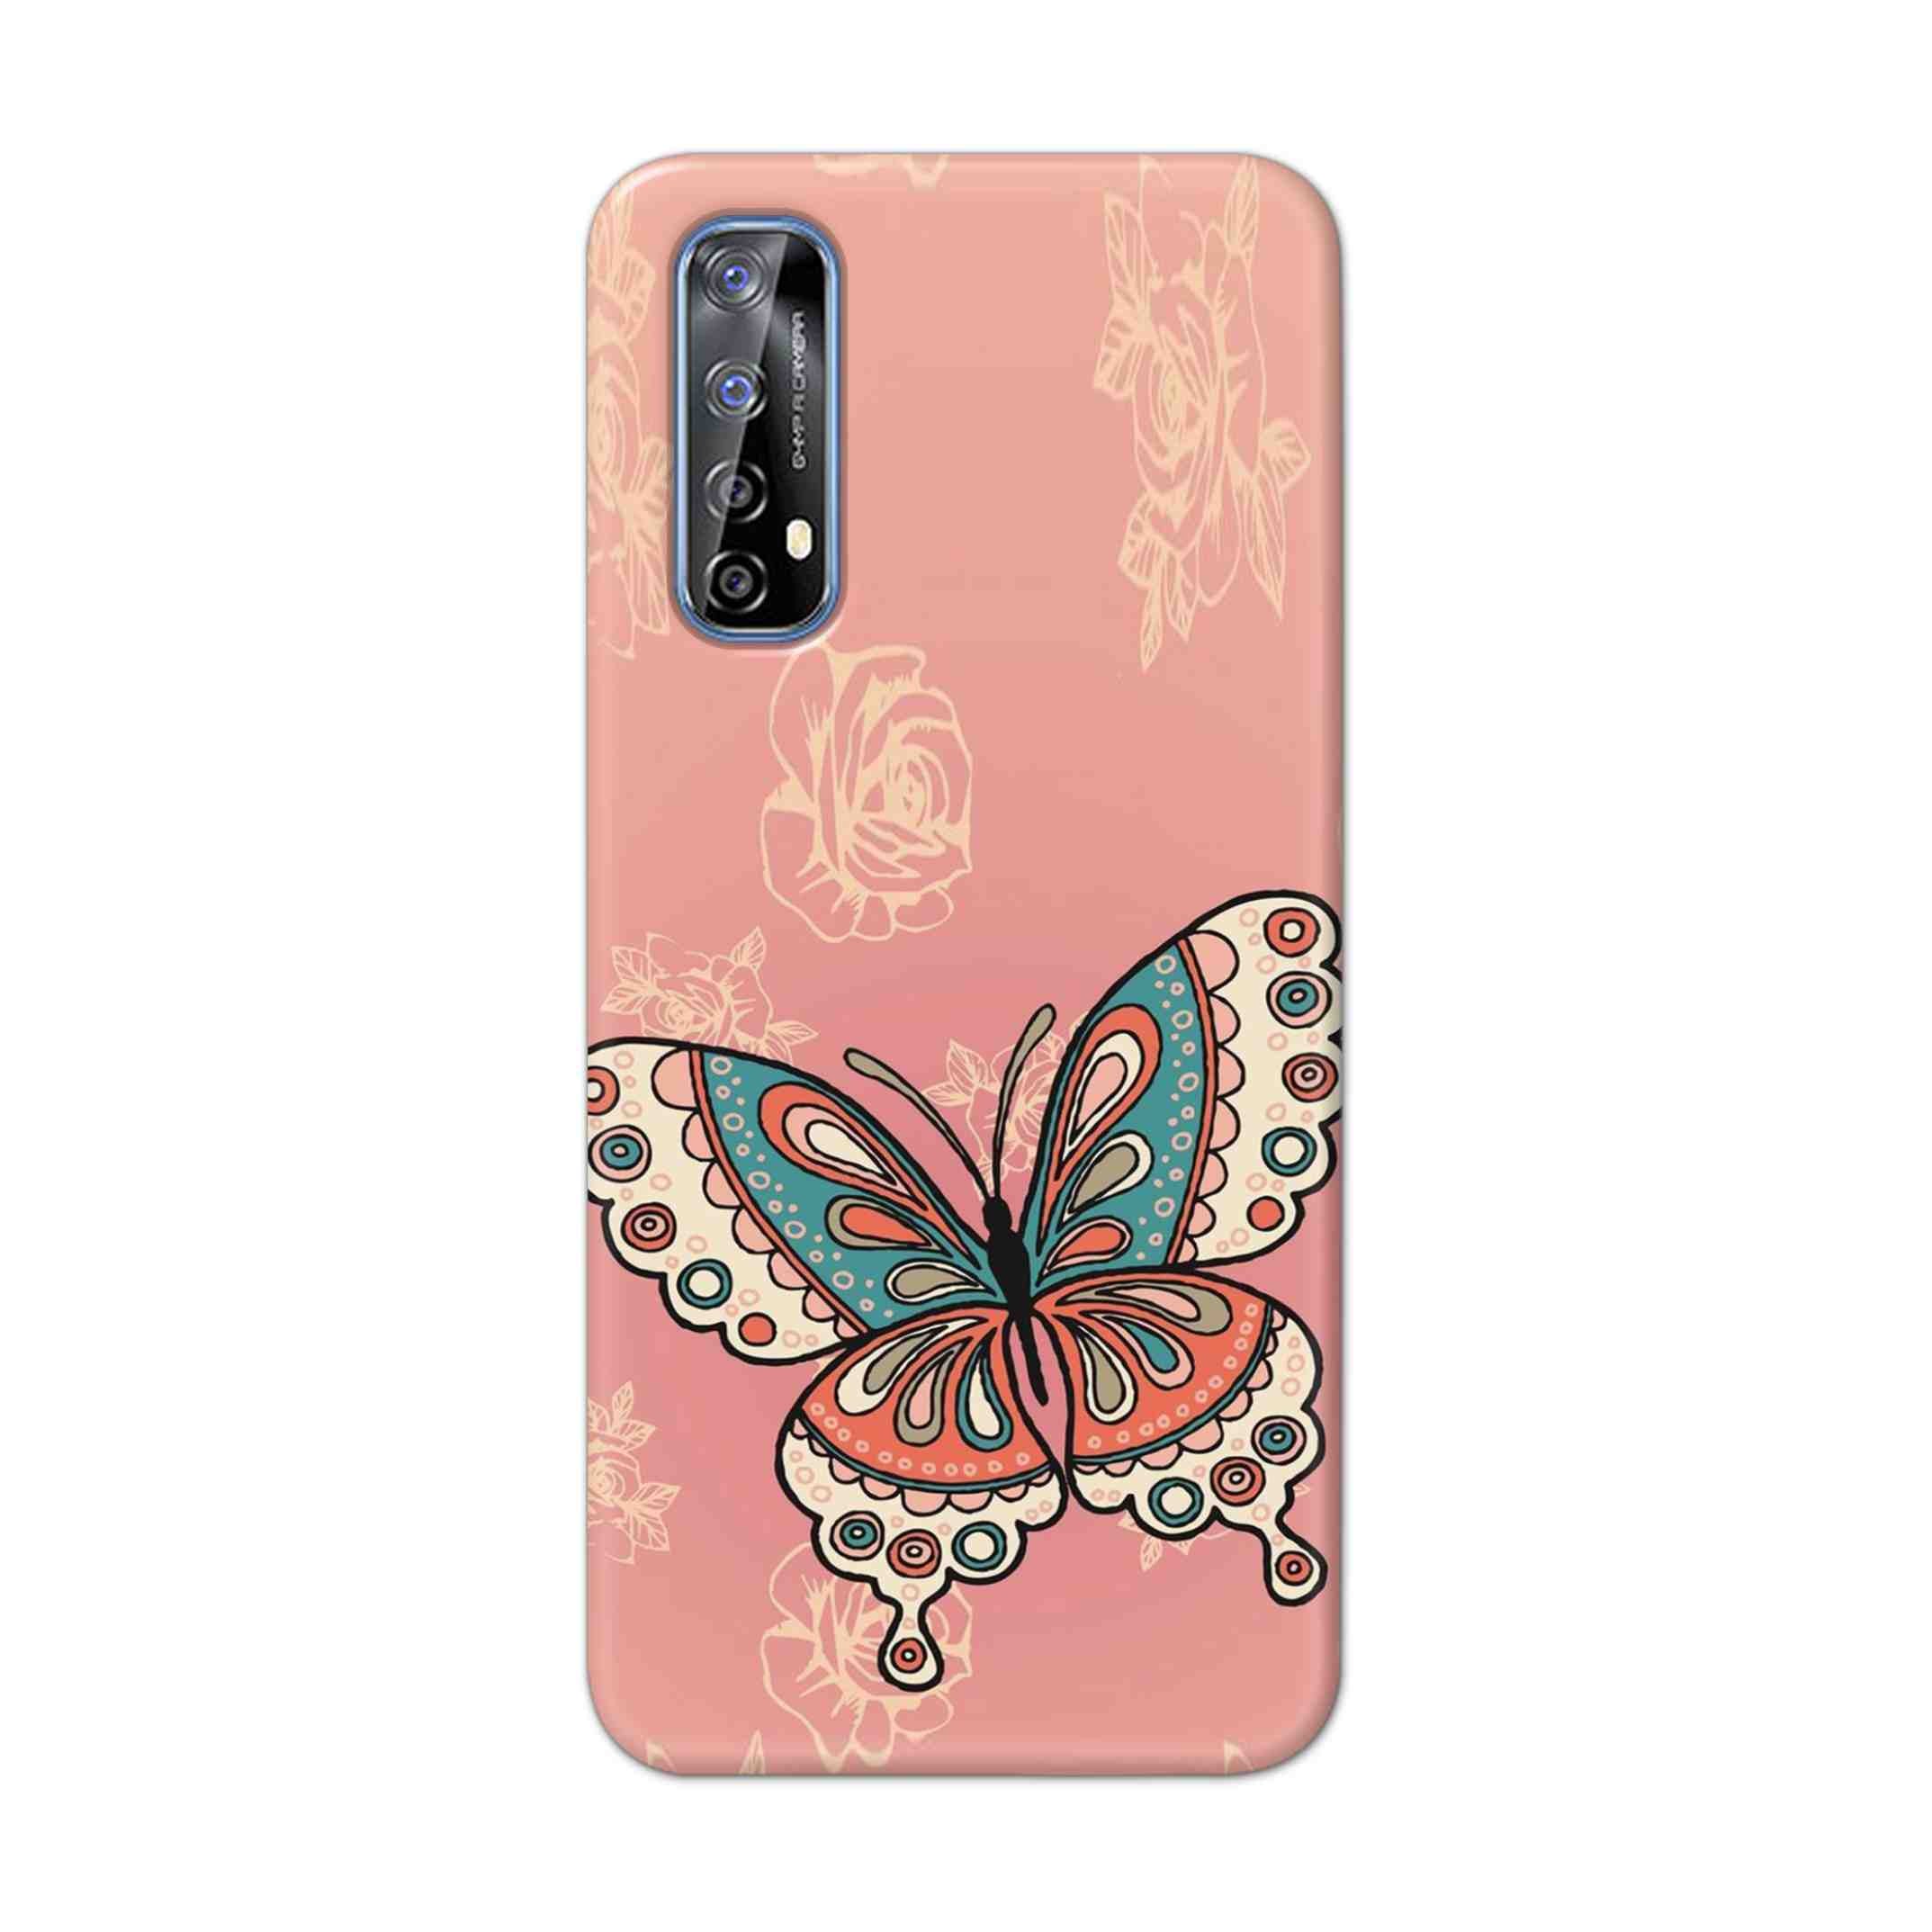 Buy Butterfly Hard Back Mobile Phone Case Cover For Realme 7 Online